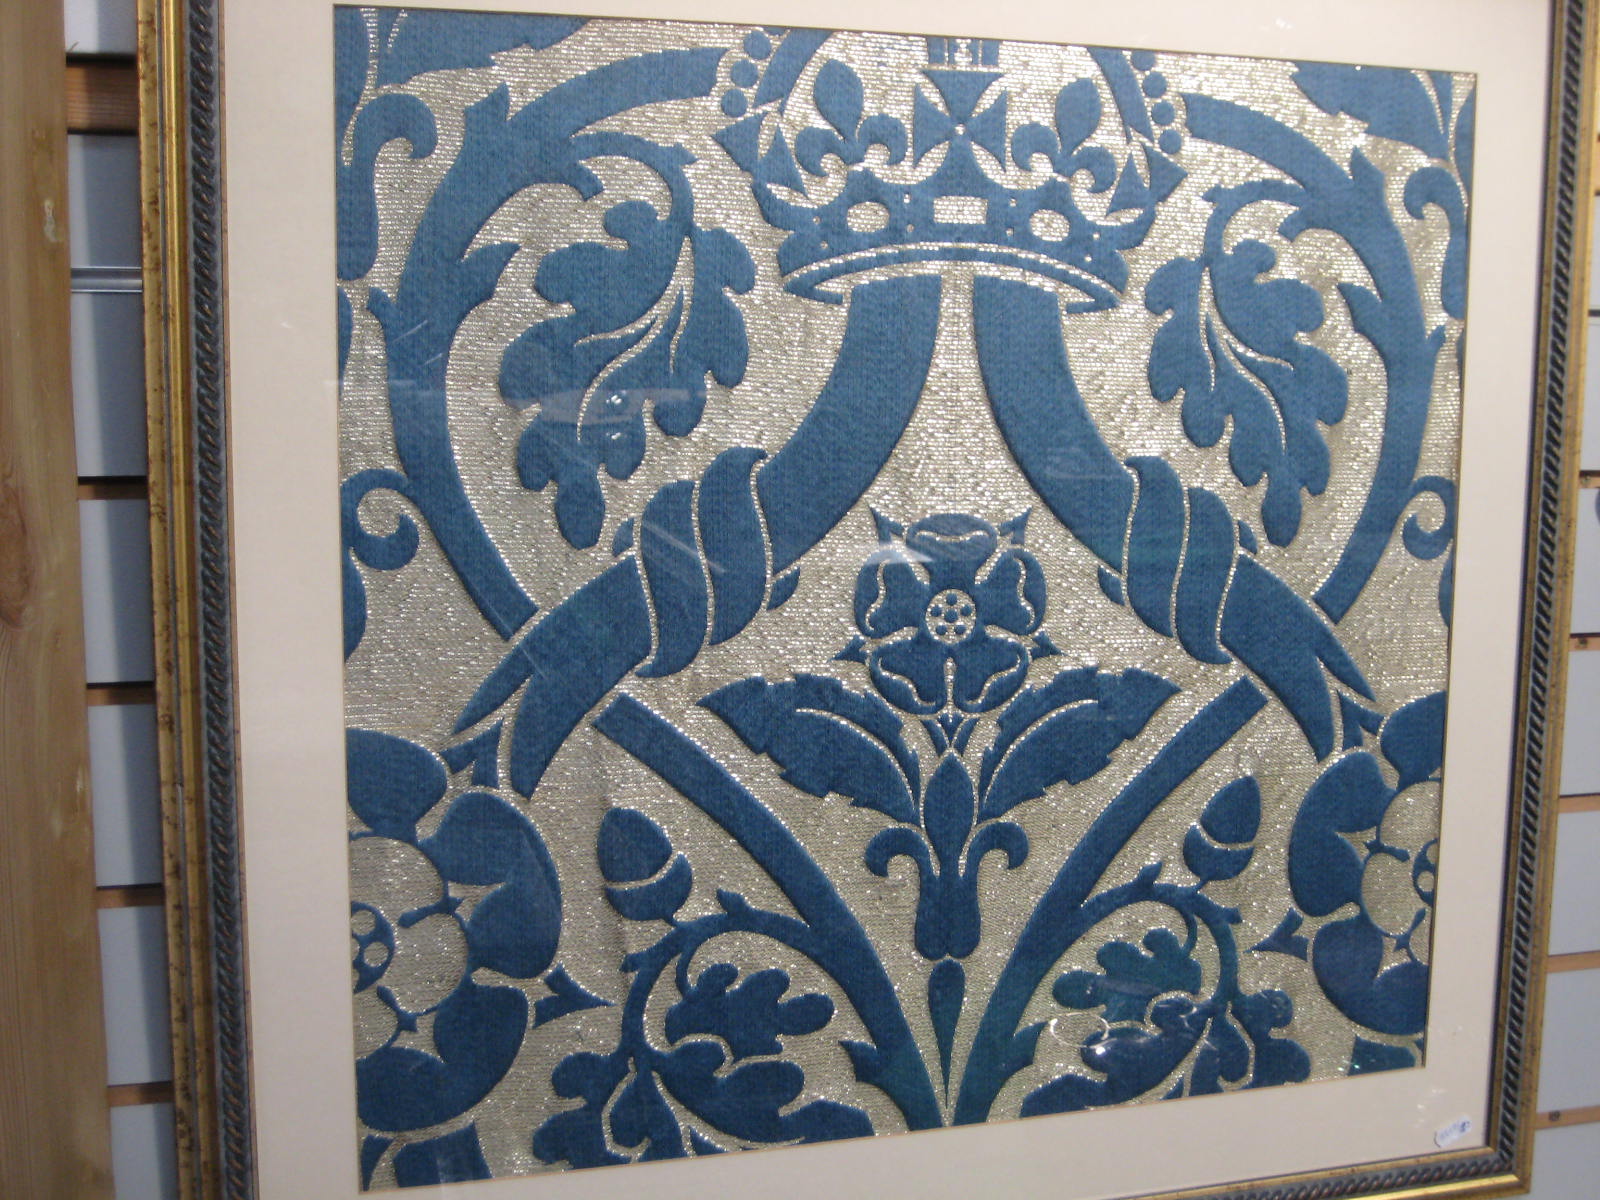 A silver thread and blue embroidered panel of a crown above a floral display